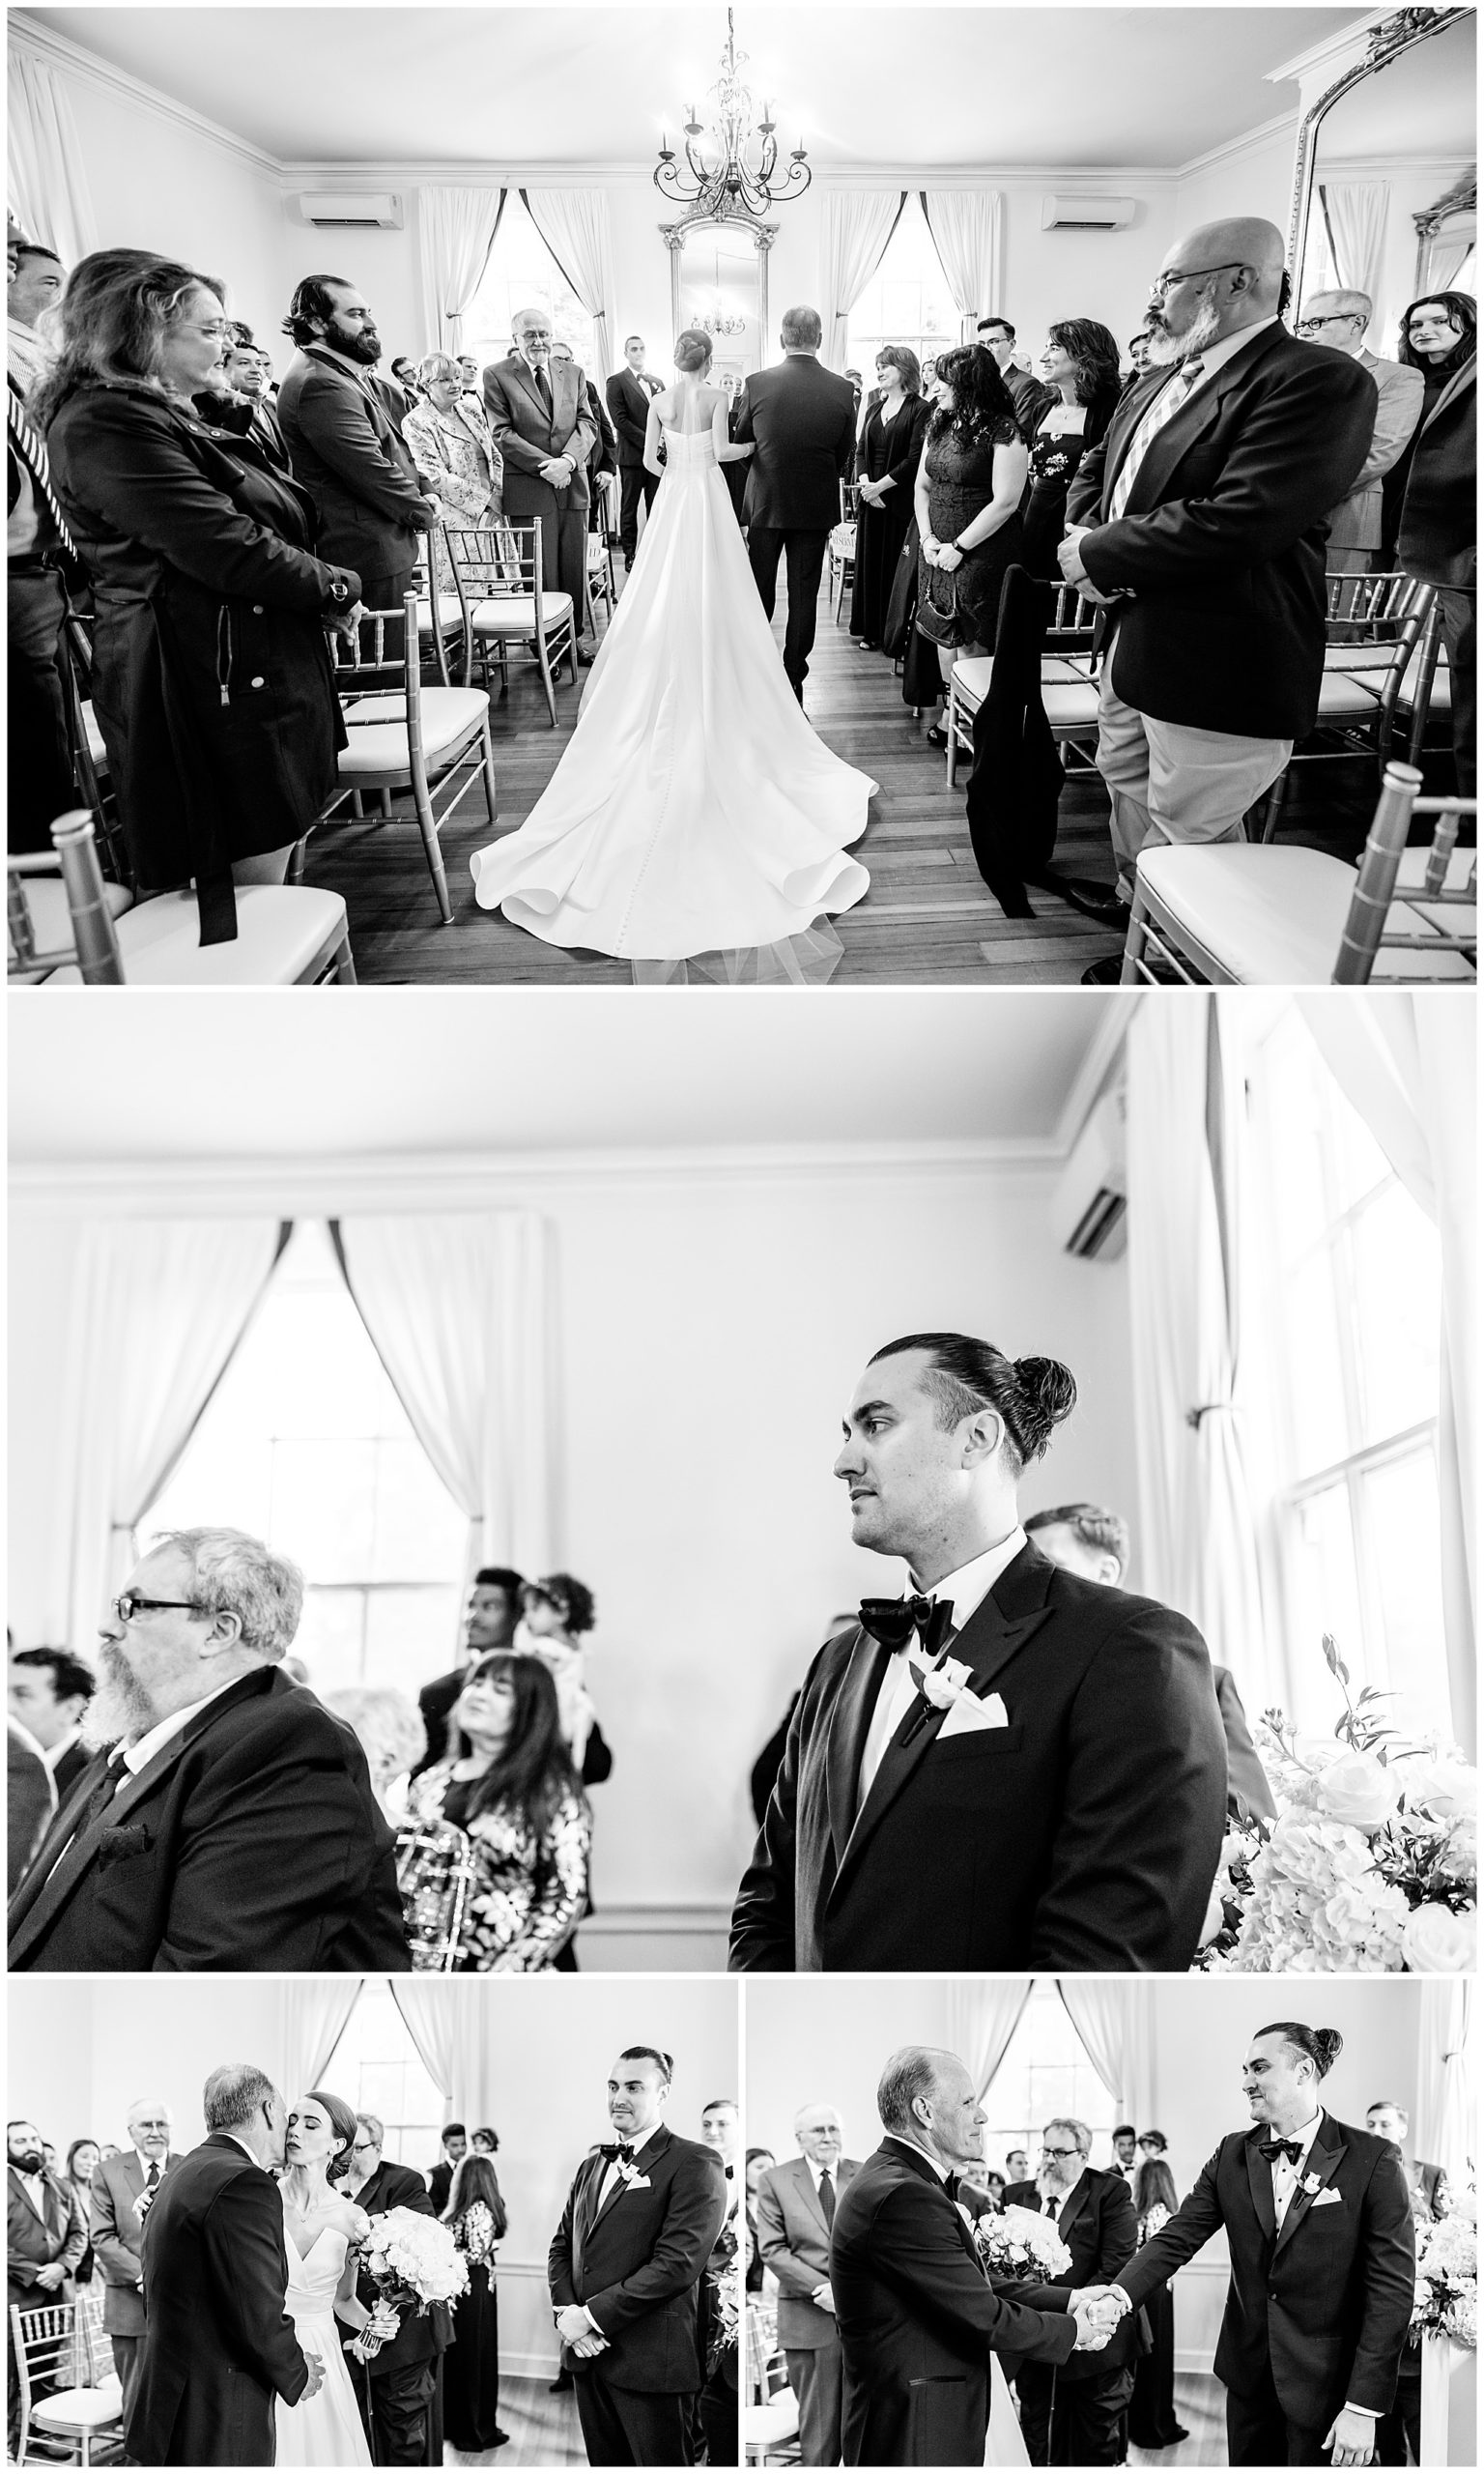 classic Rust Manor House wedding, sprig wedding, black and white aesthetic, classic wedding aesthetic, White Pumpkin Weddings City Tavern Club wedding, Leesburg wedding, Leesbur bride, manor house wedding, classic DC wedding, northern Virginia wedding venue, classic wedding venue, Washington DC wedding photographer, Rachel E.H. Photography, black and white, bride walking down aisle with father, groom standing at alter